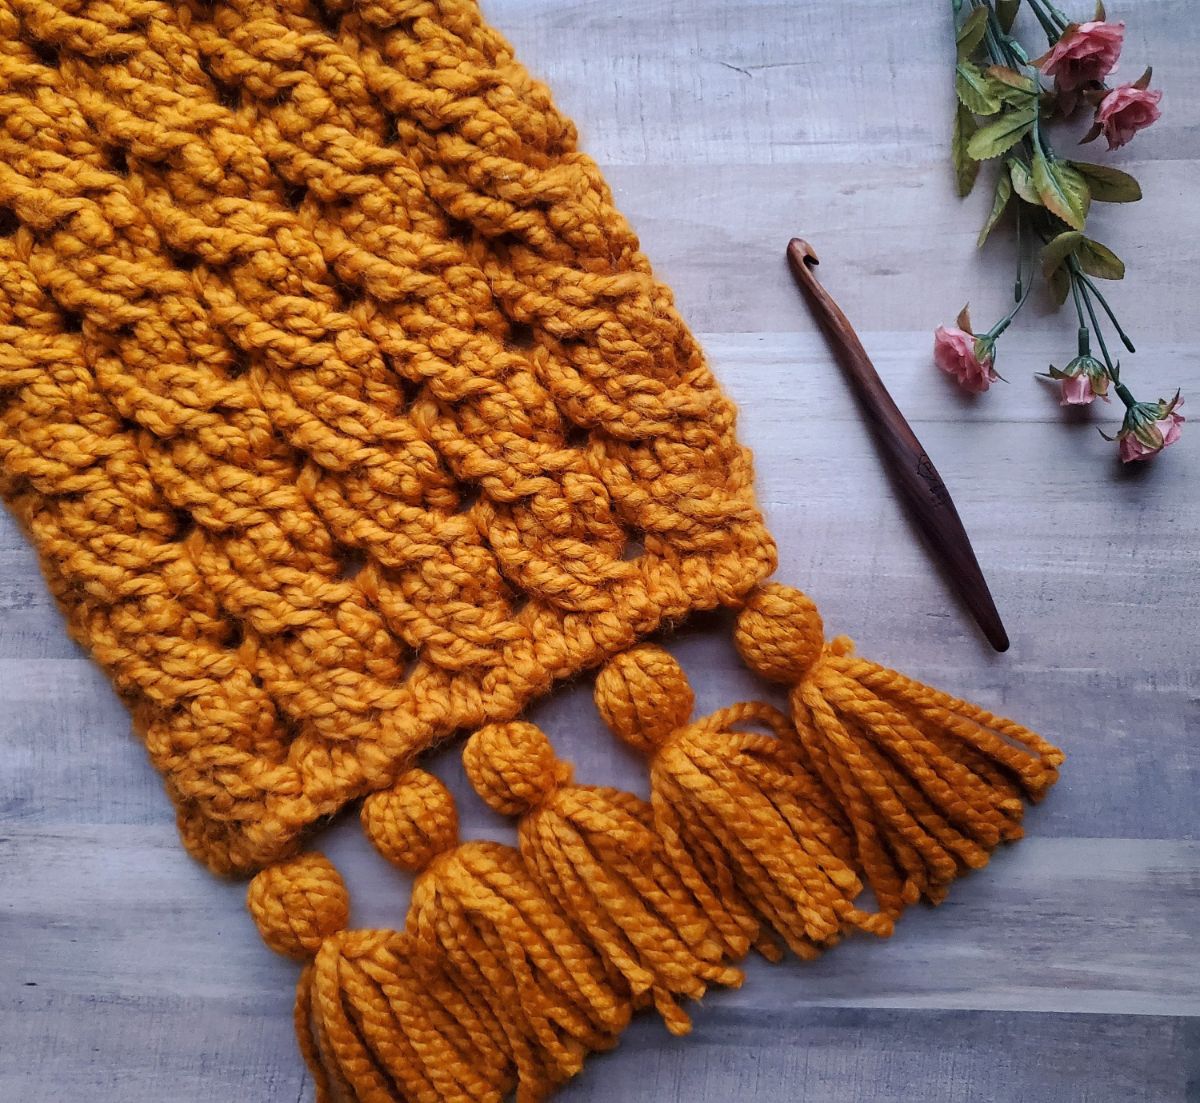 The bottom of an oversized mustard yellow crochet scarf with thick tassels along the bottom.